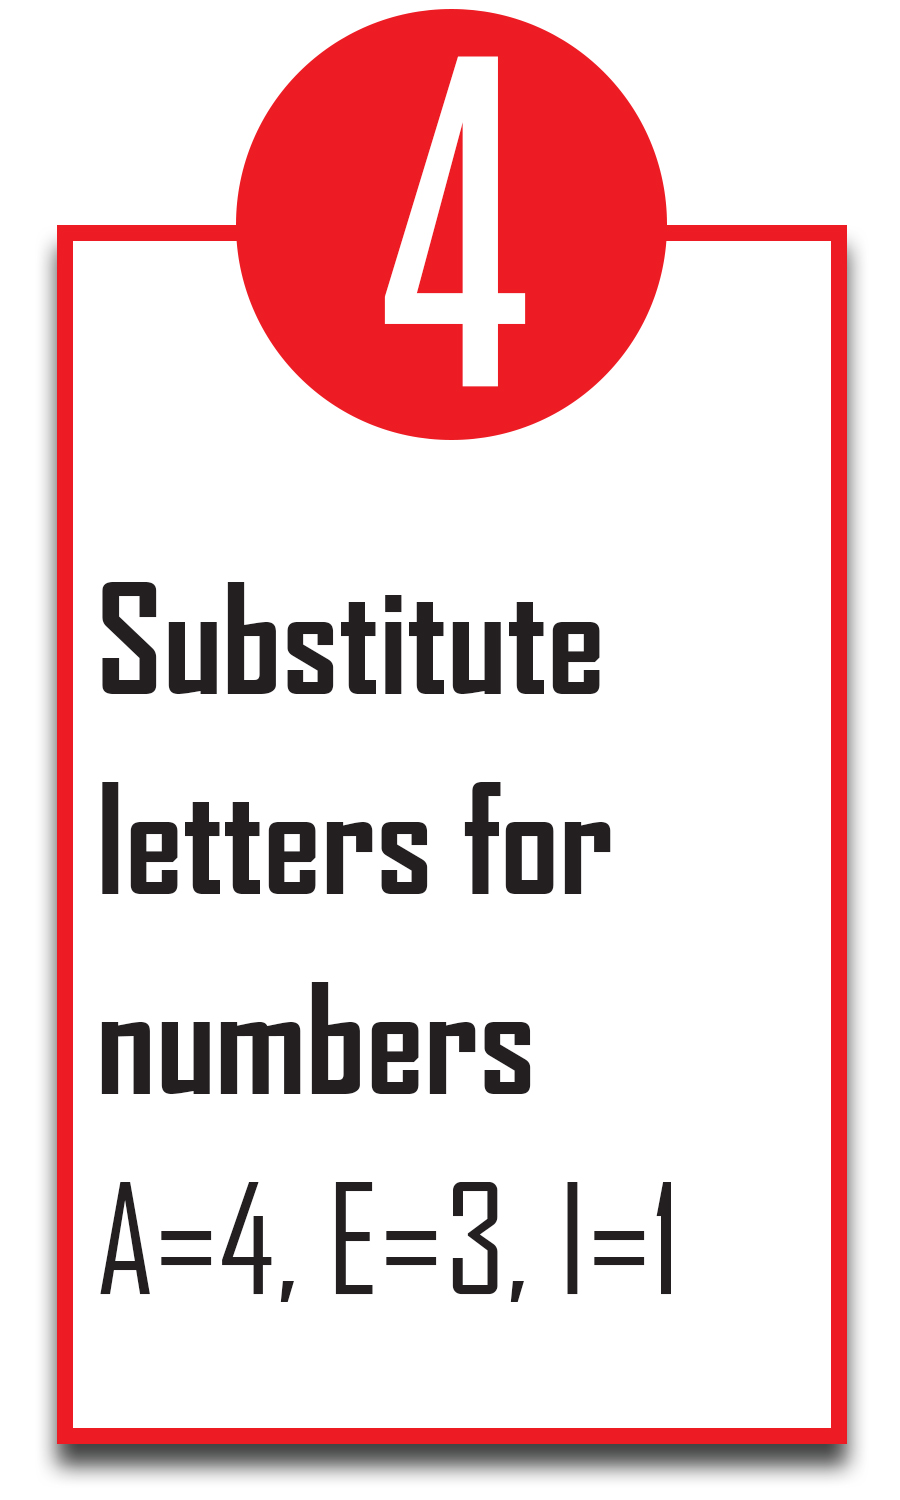 Substitute letters for numbers.